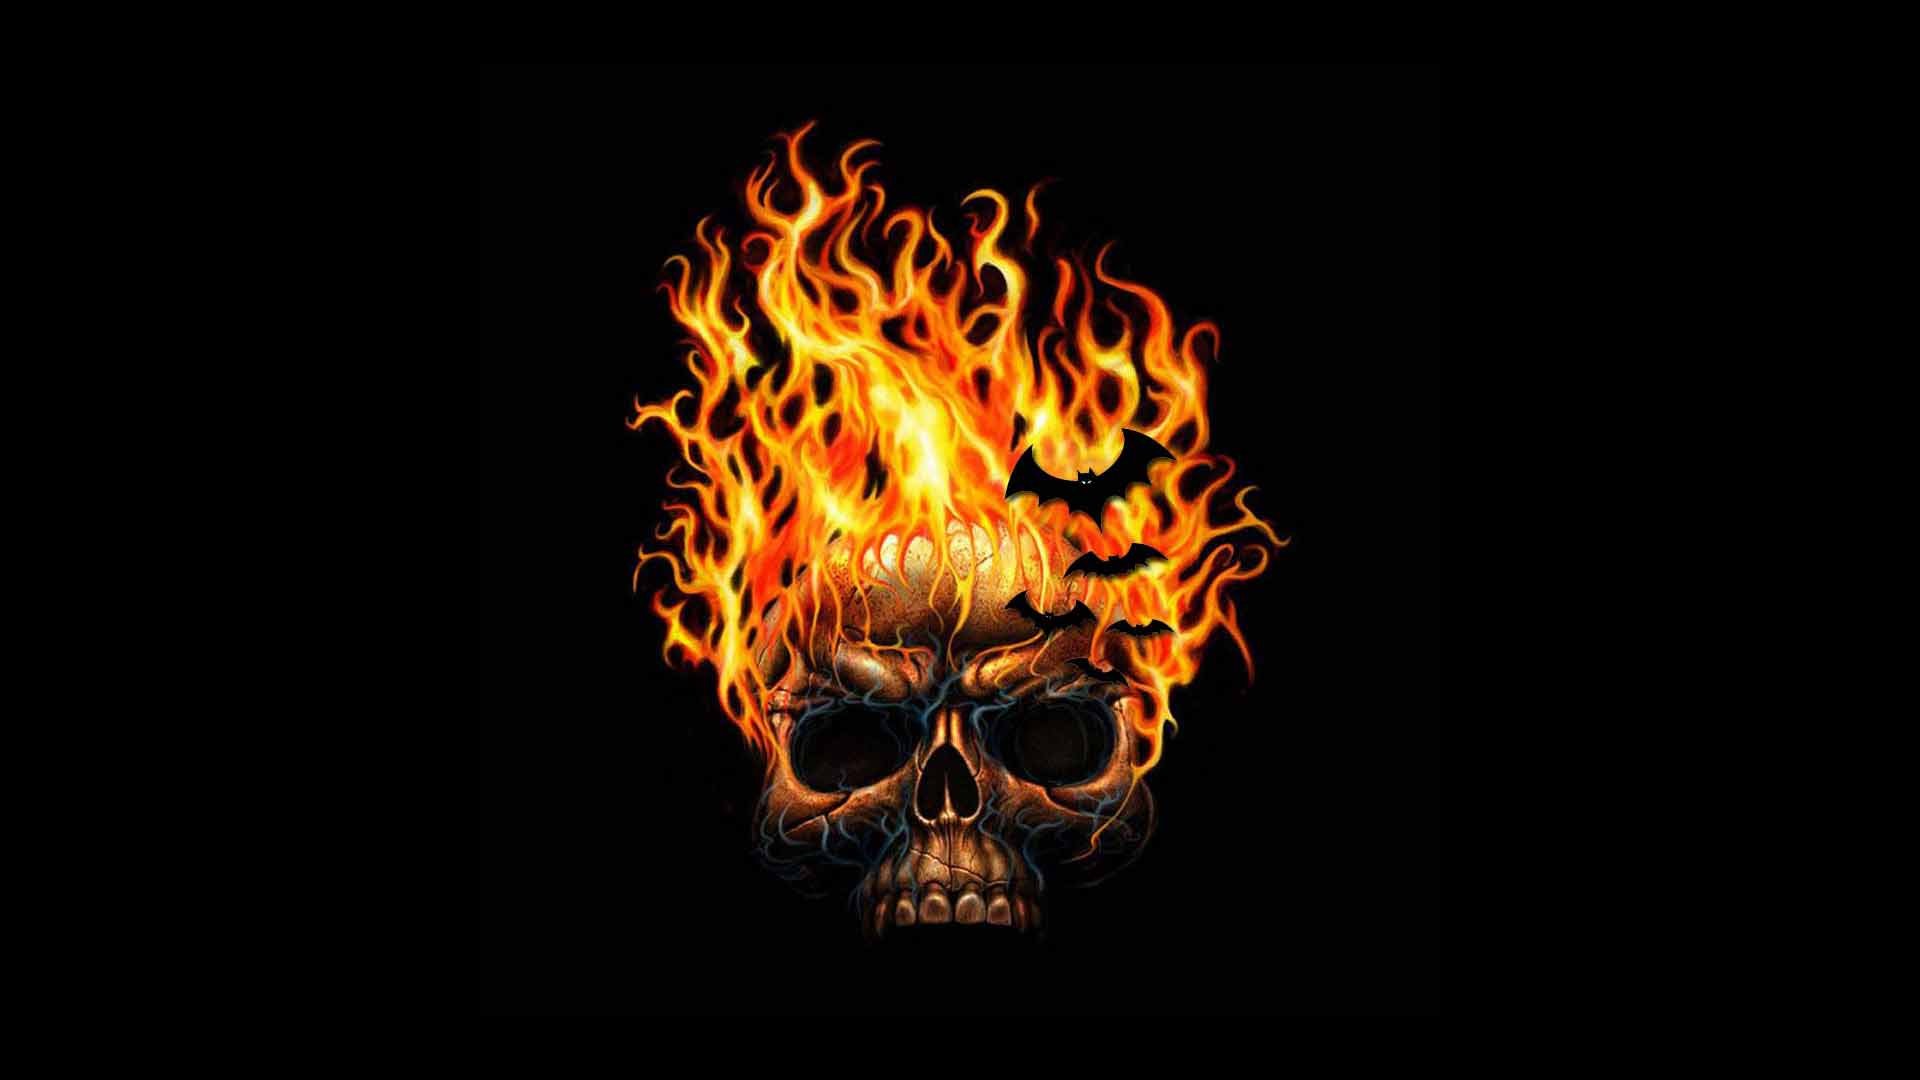 Flaming Skull Tattoos Wallpaper - Cool Wallpapers For Boys , HD Wallpaper & Backgrounds